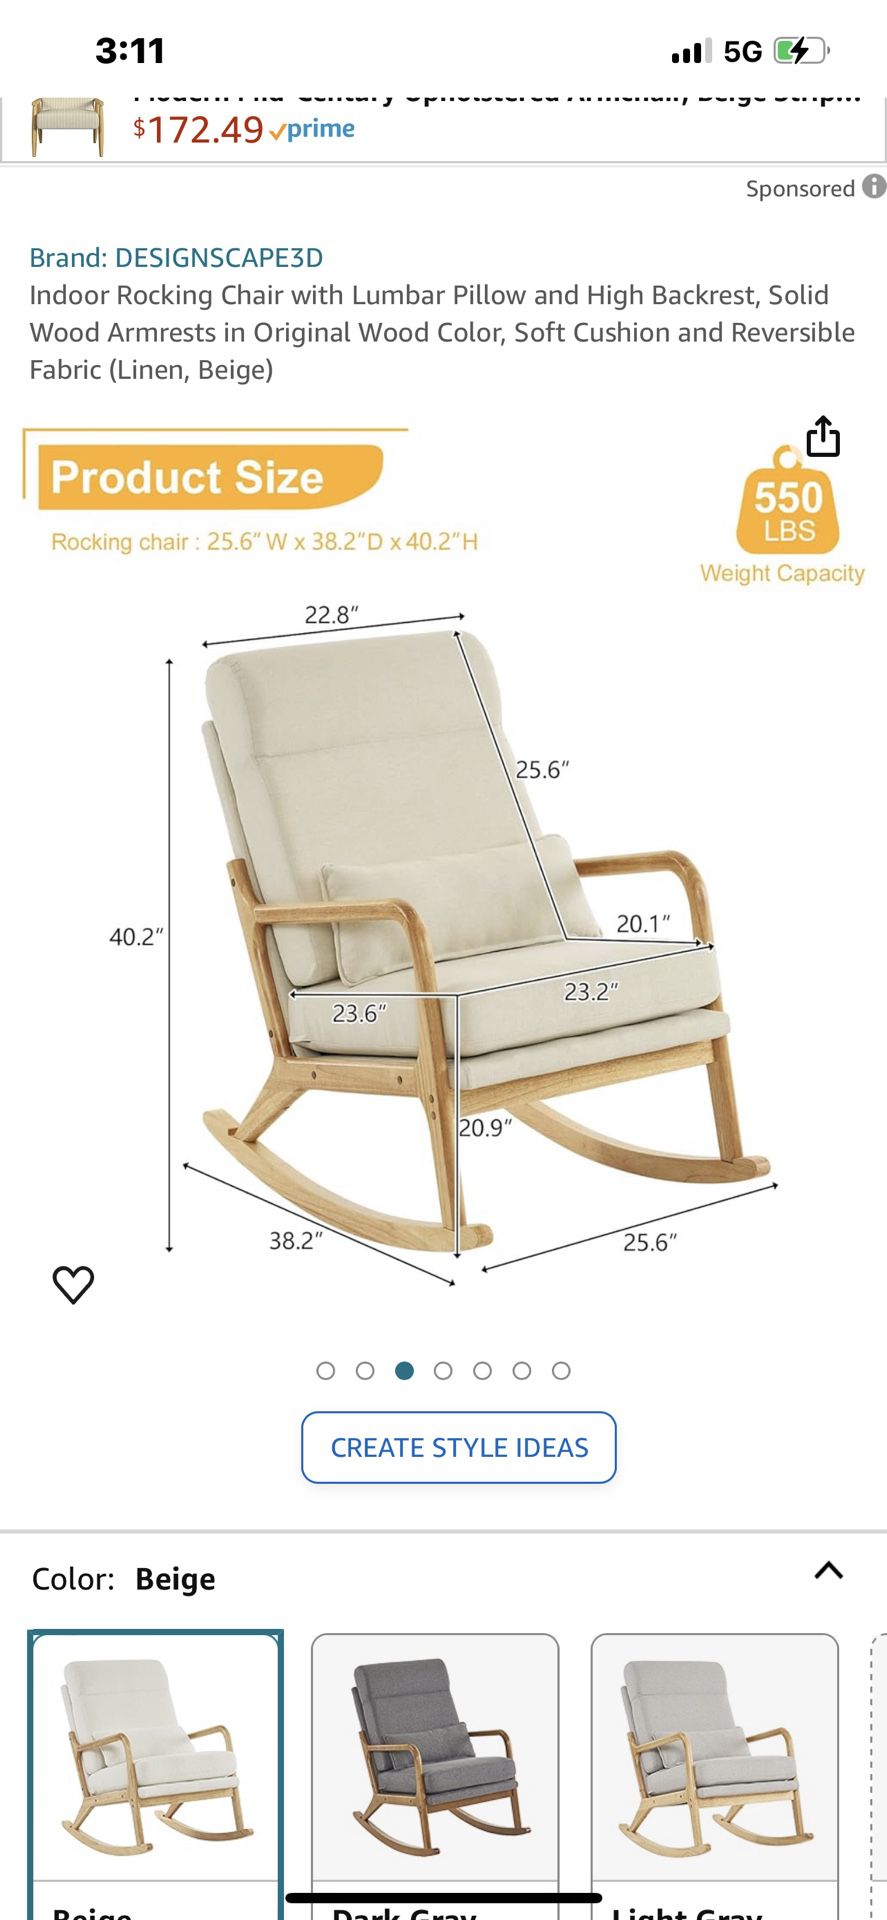 Indoor Rocking Chair with Lumbar Pillow and High Backrest, Solid Wood Armrests in Original Wood Color, Soft Cushion and Reversible Fabric (Linen, Beig